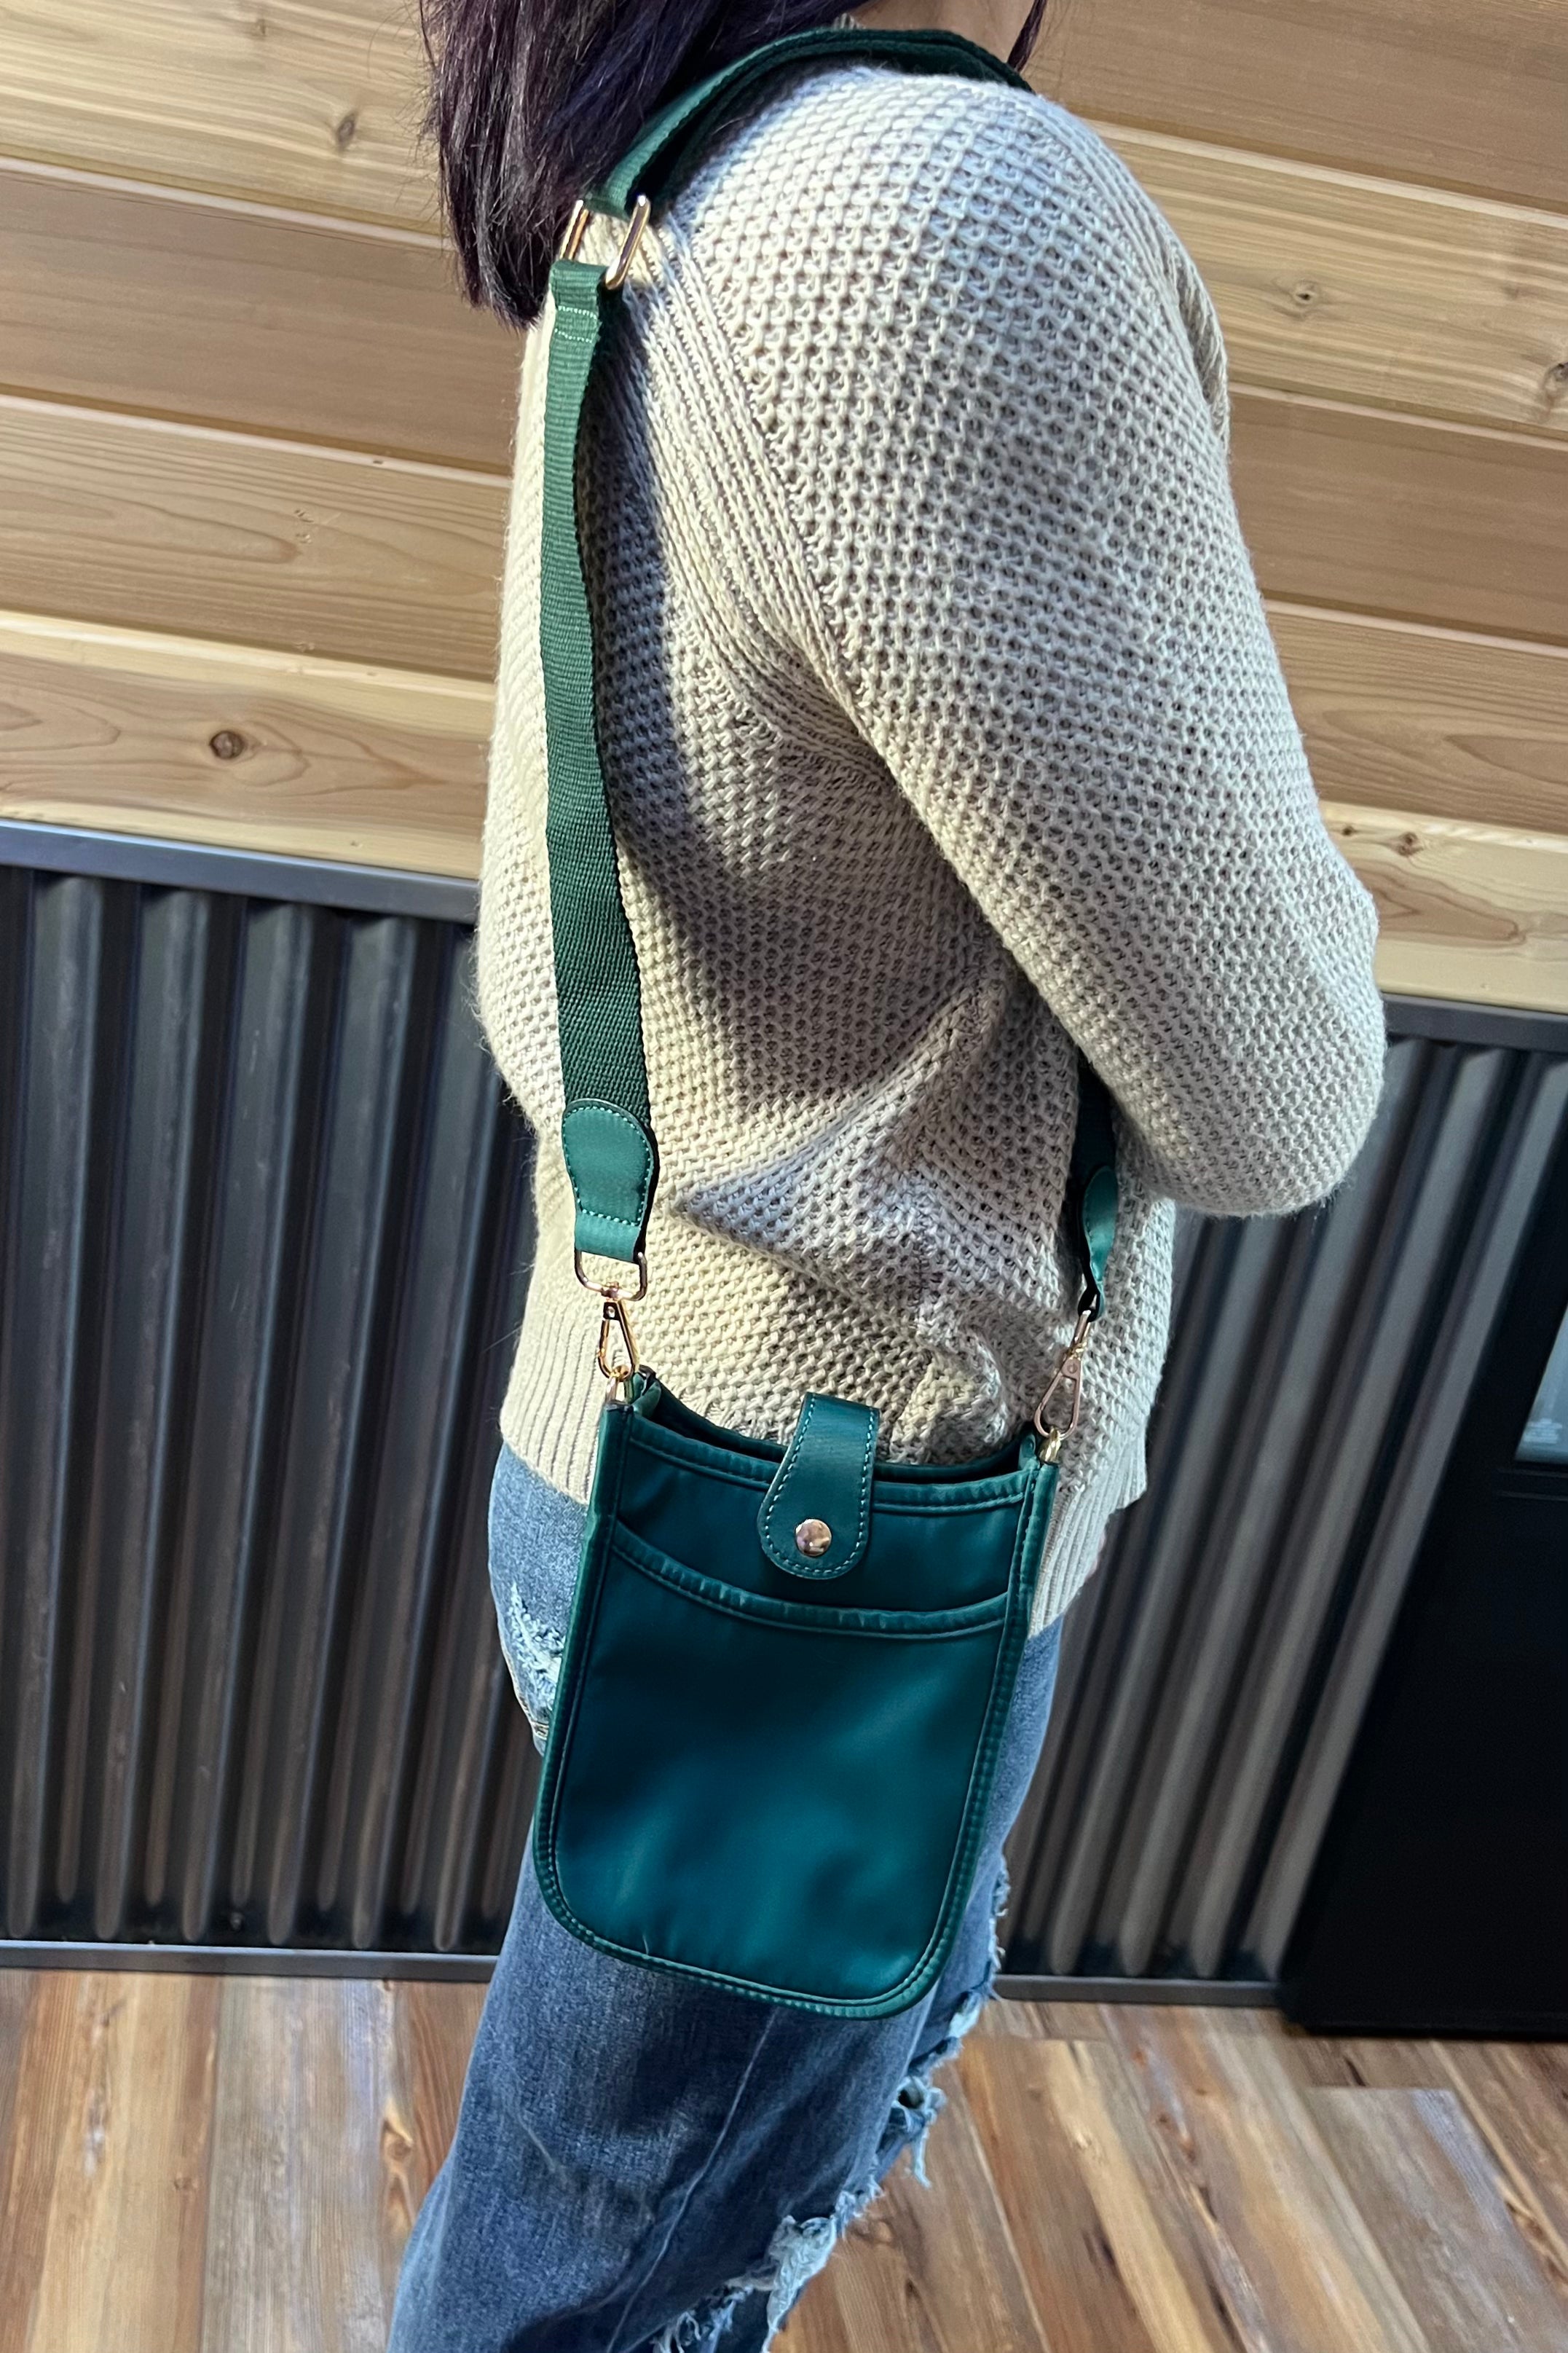 Pull A Fast One Nylon Crossbody Bag in Teal